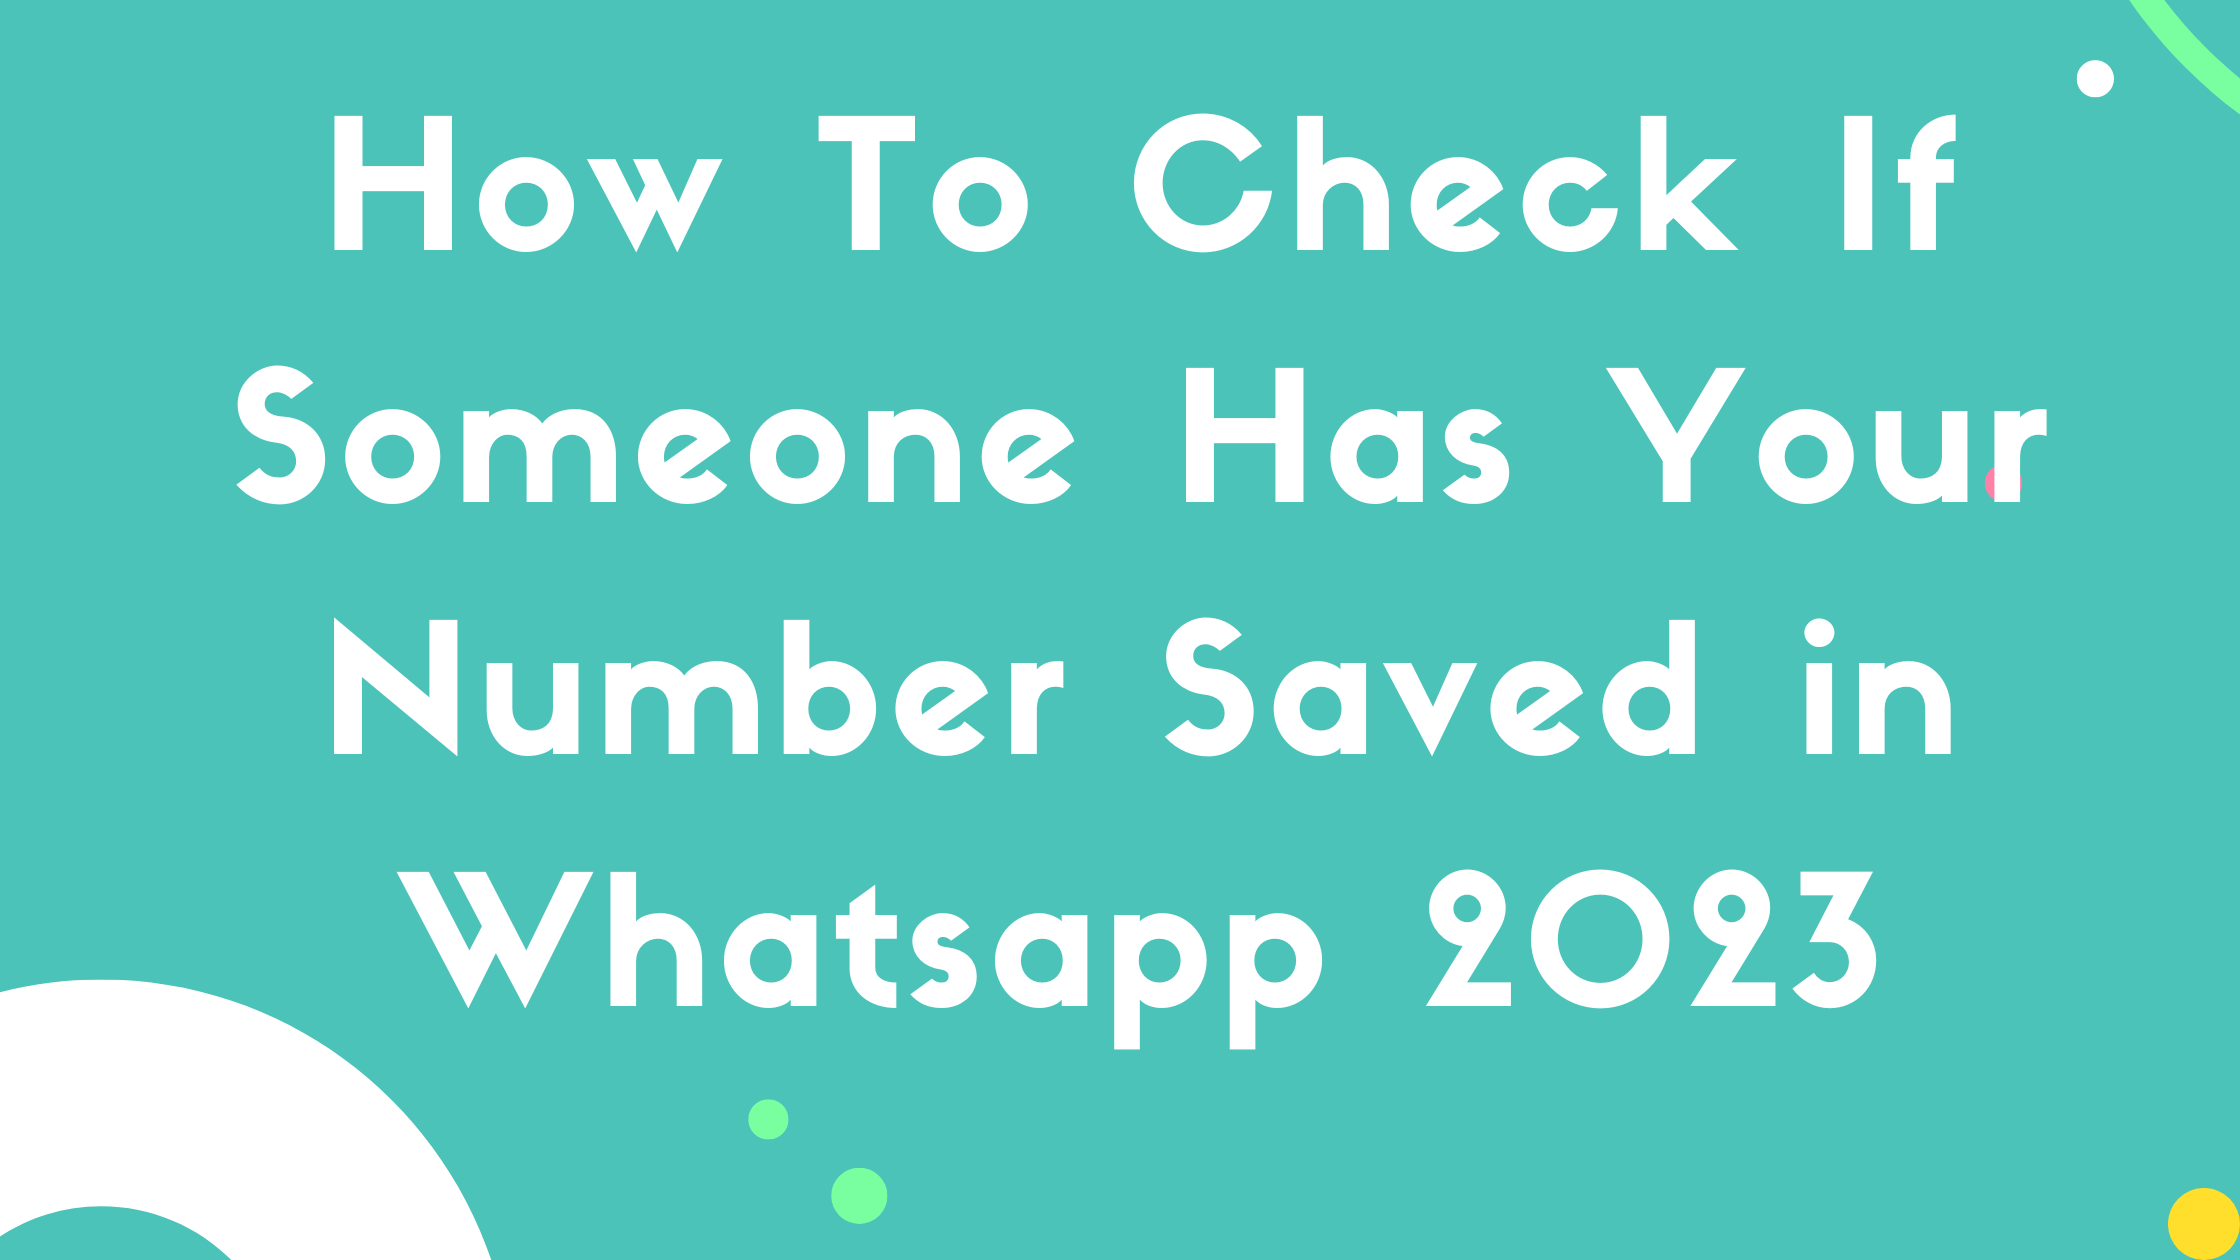 How To Check If Someone Has Your Number Saved in Whatsapp 2023